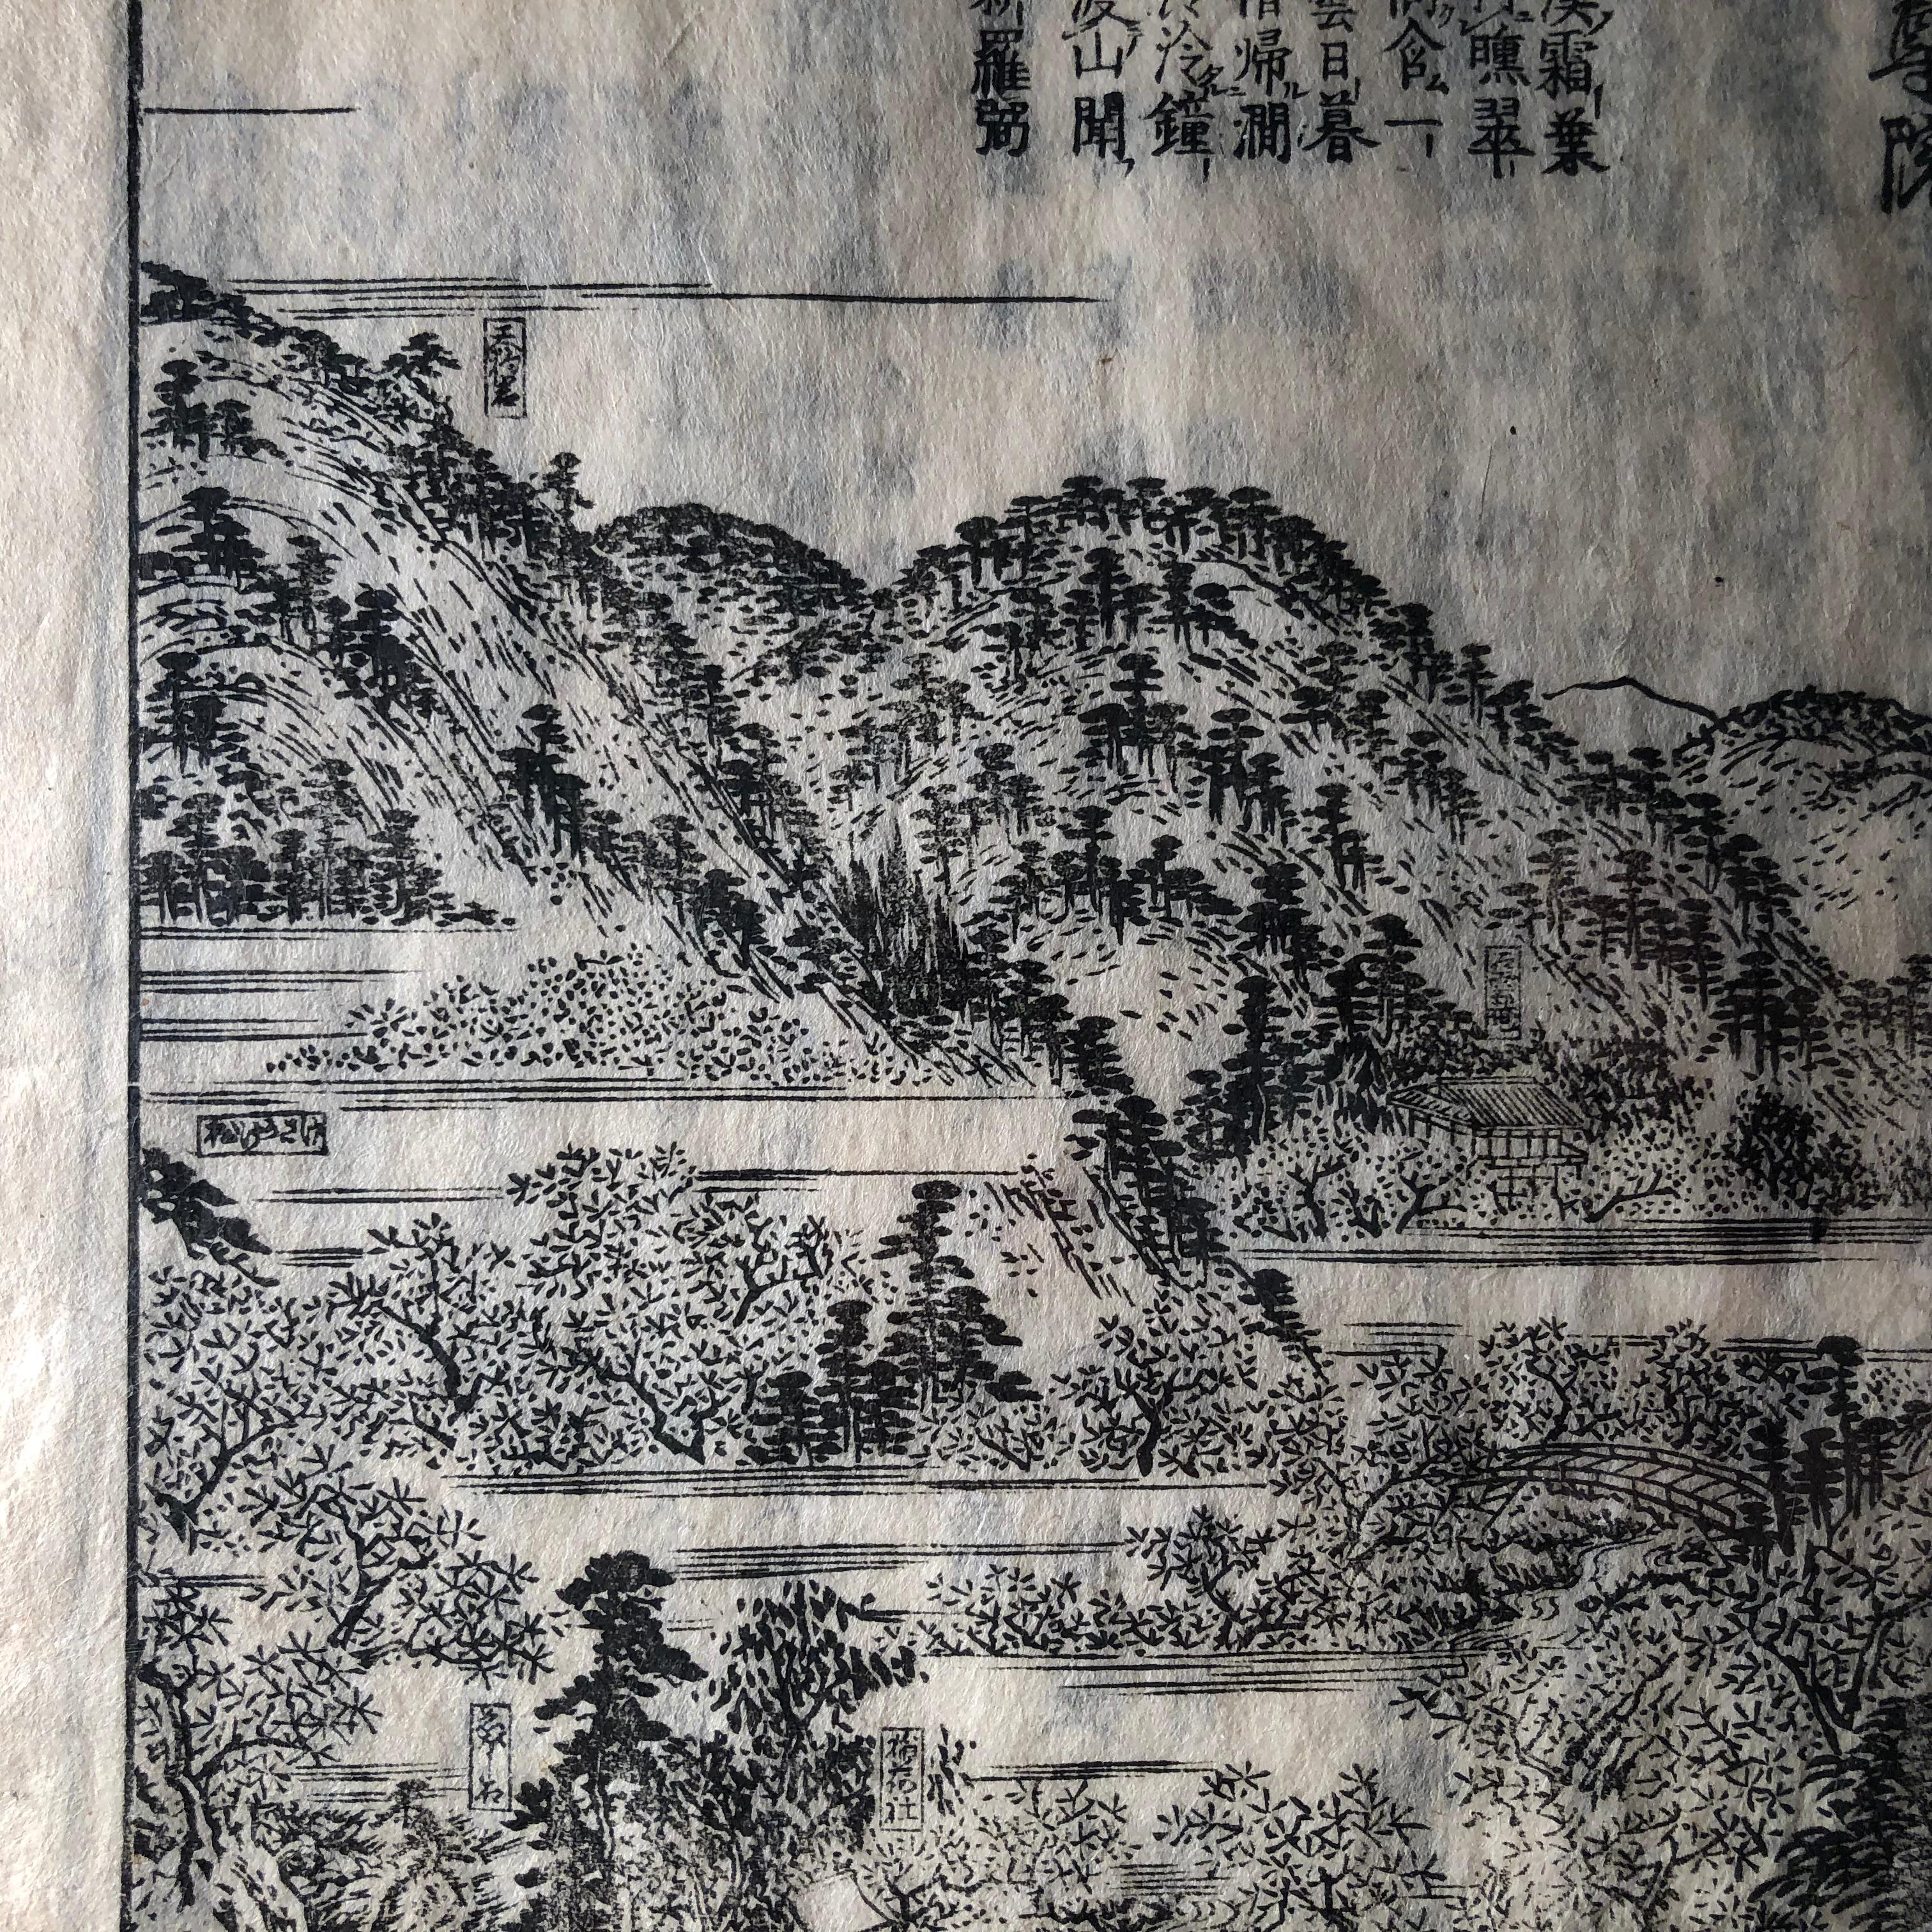 Japanese Four Old Kyoto Garden Woodblock Prints 18th-19th Century, Frameable #1 3